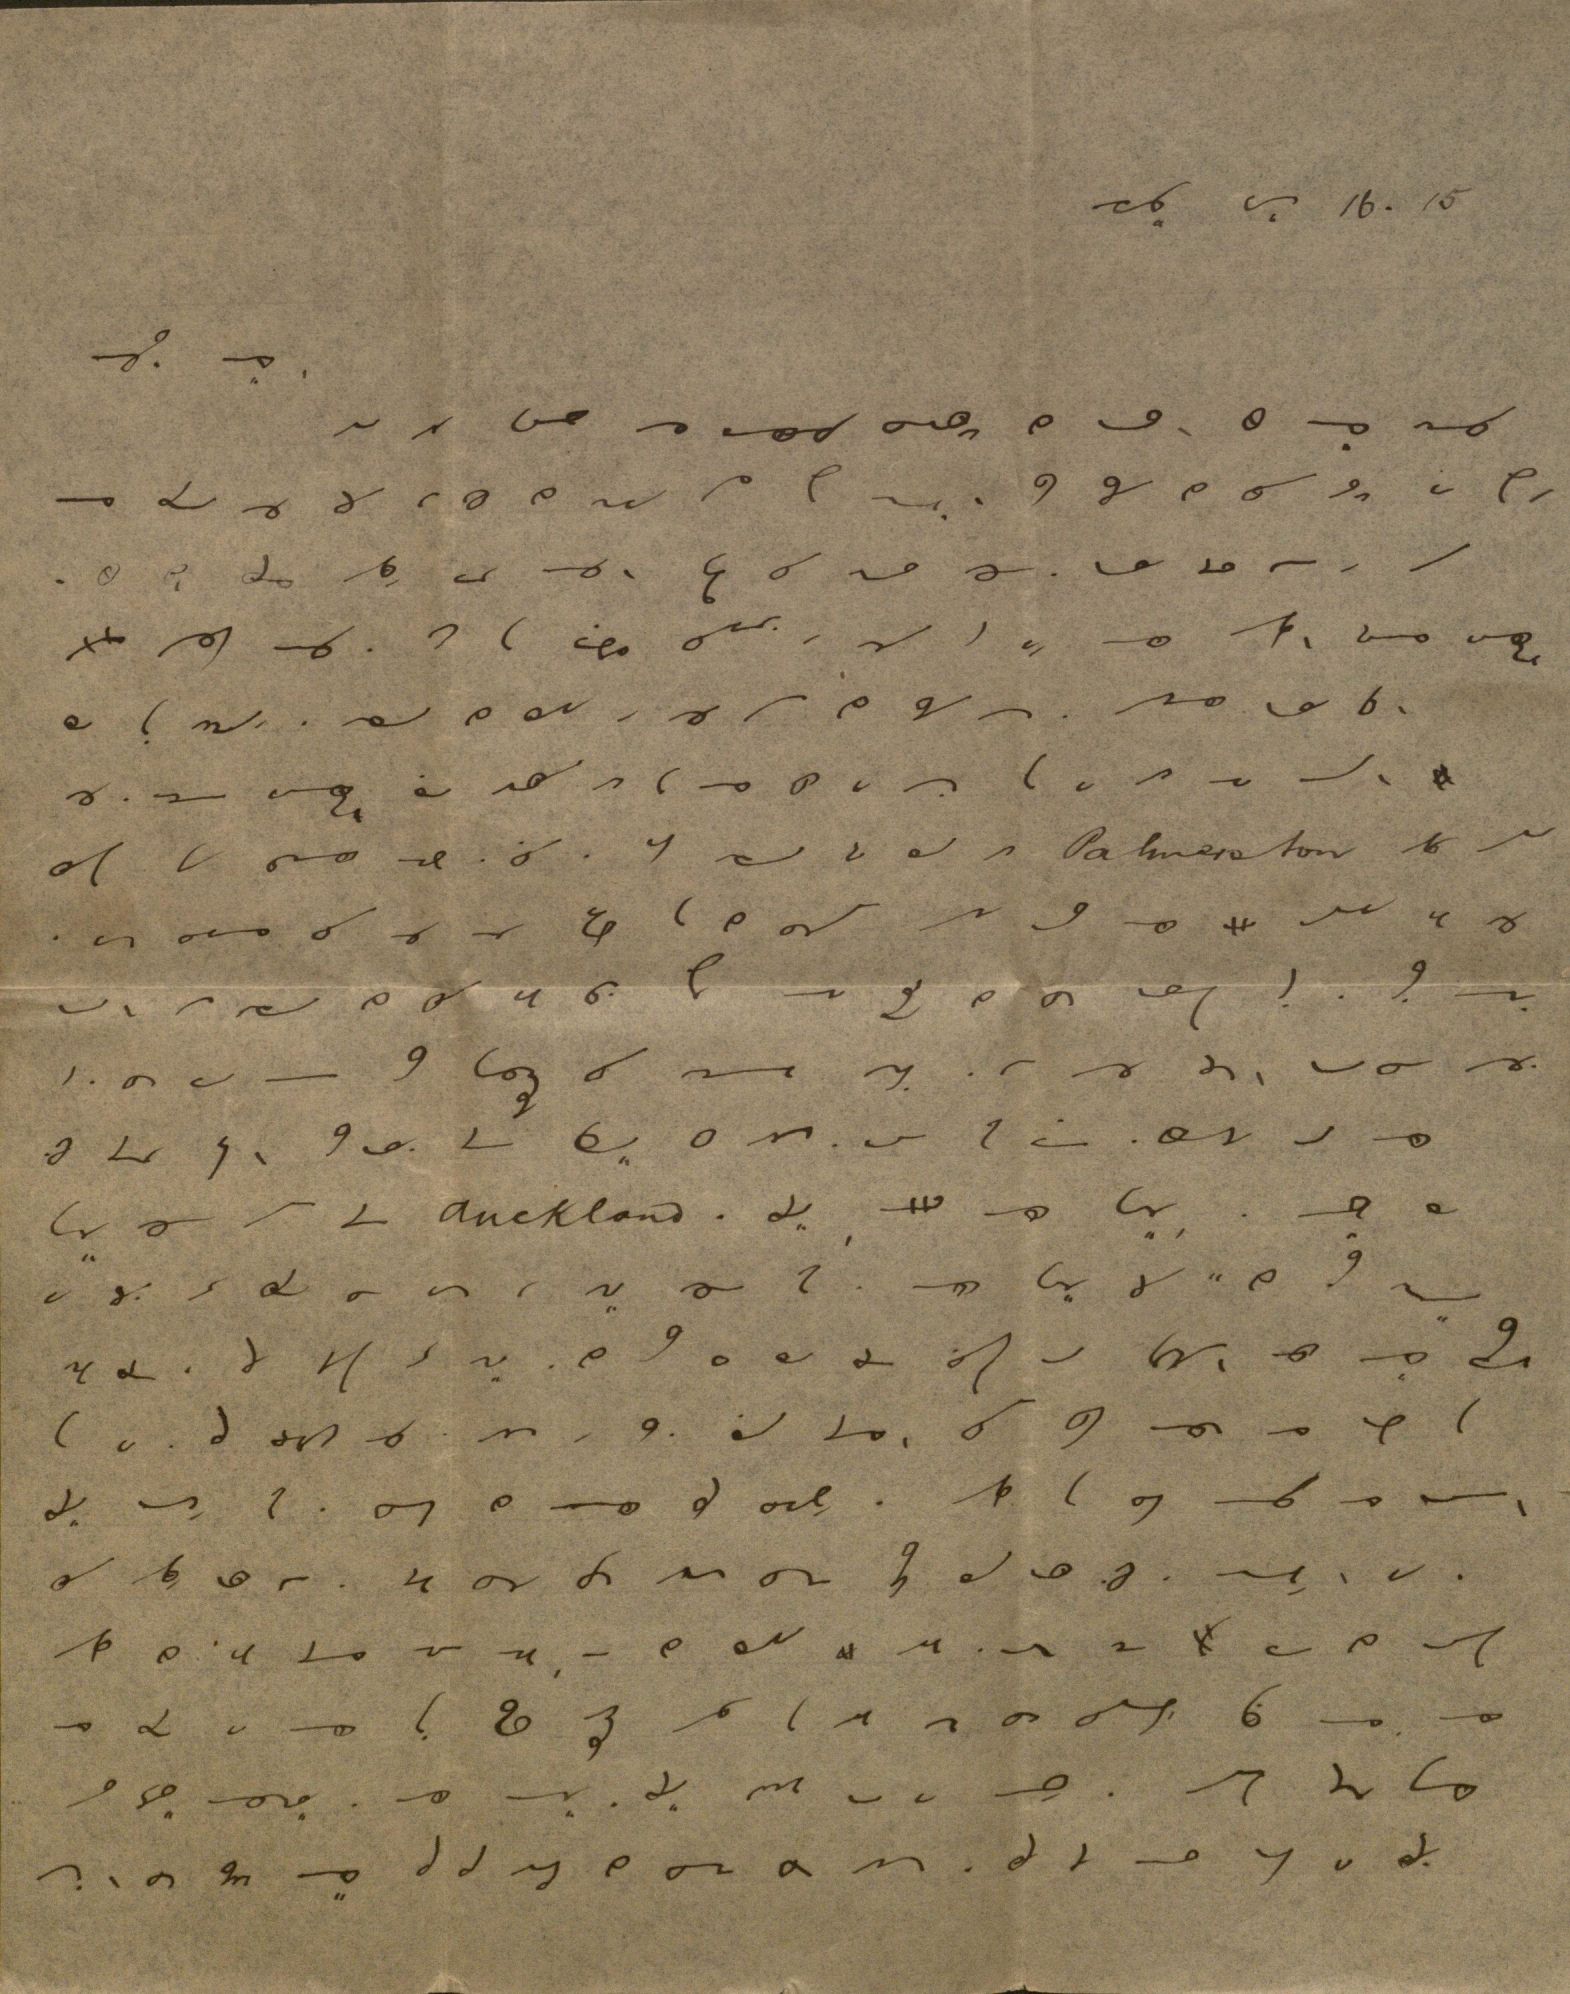 Image of the first page of a letter from Henderson to Gillette in shorthand